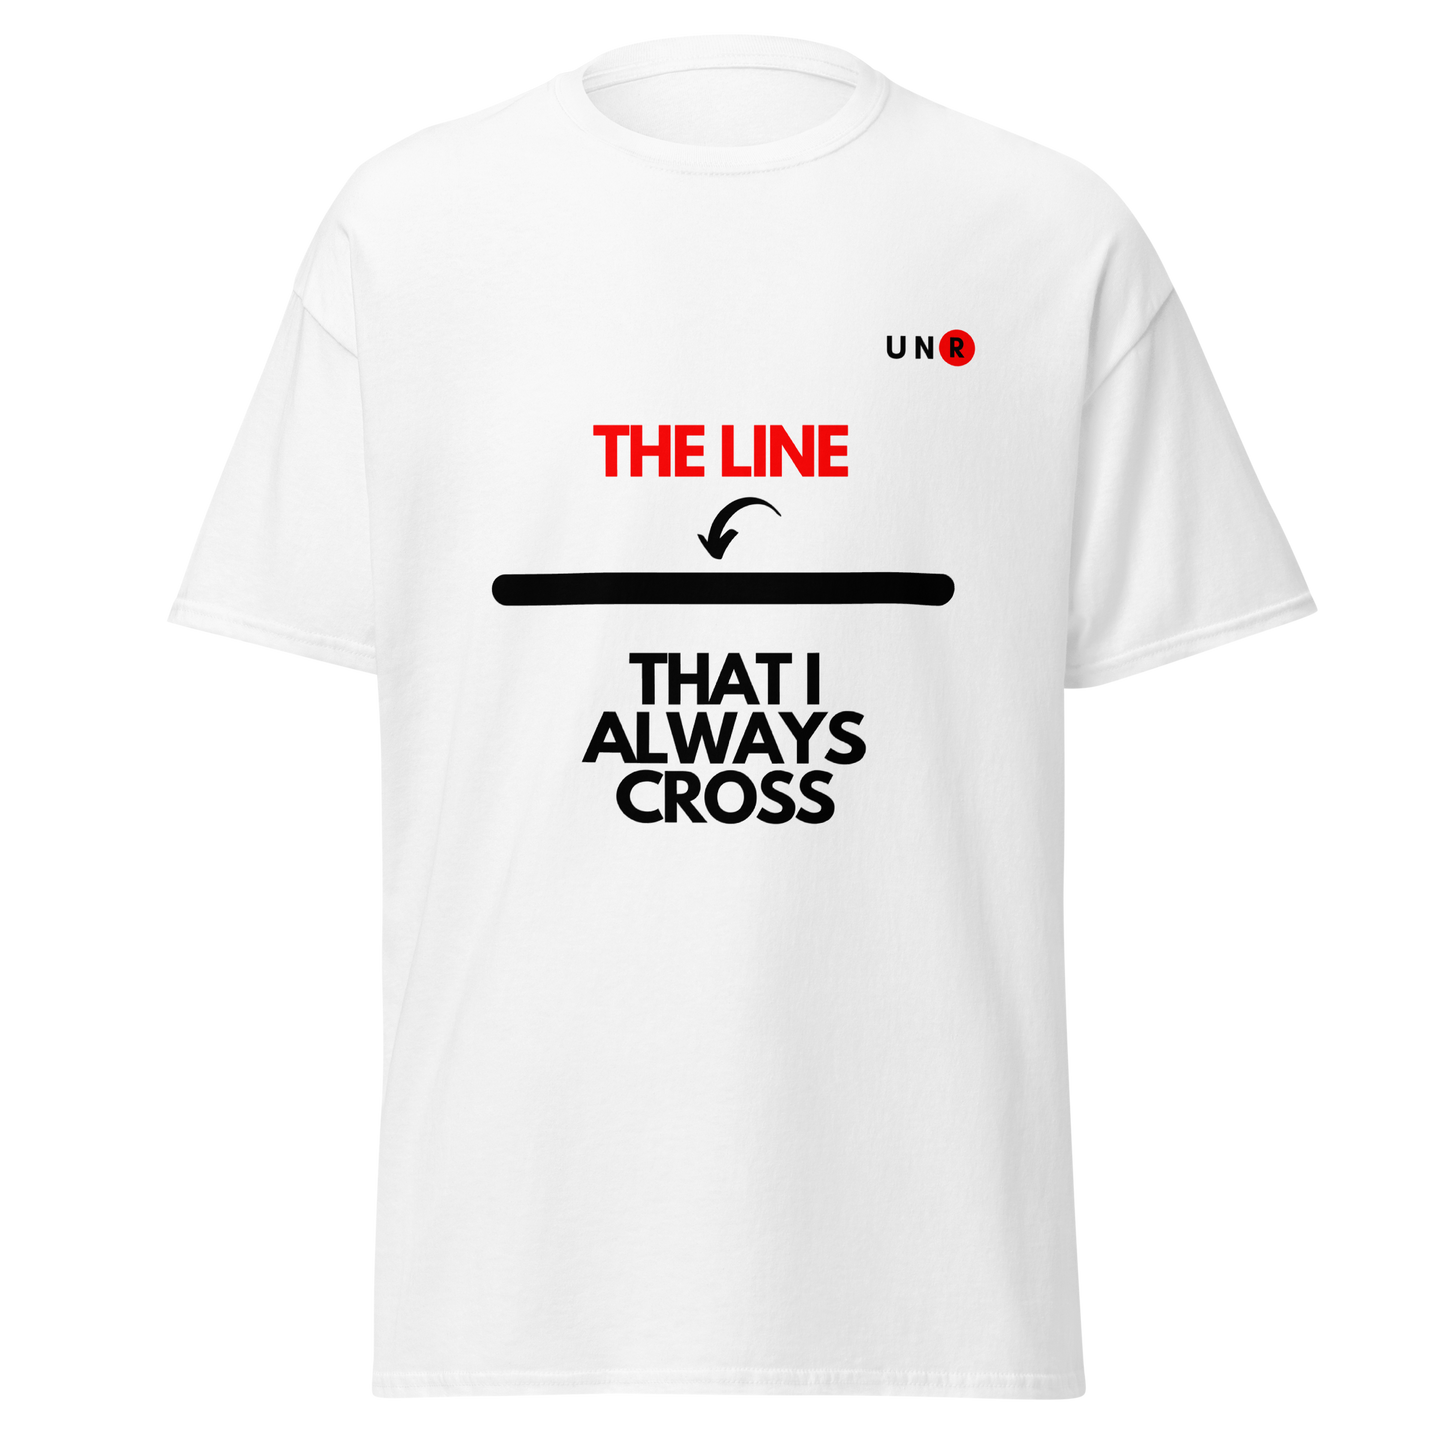 The Line That I Always Cross T-shirt